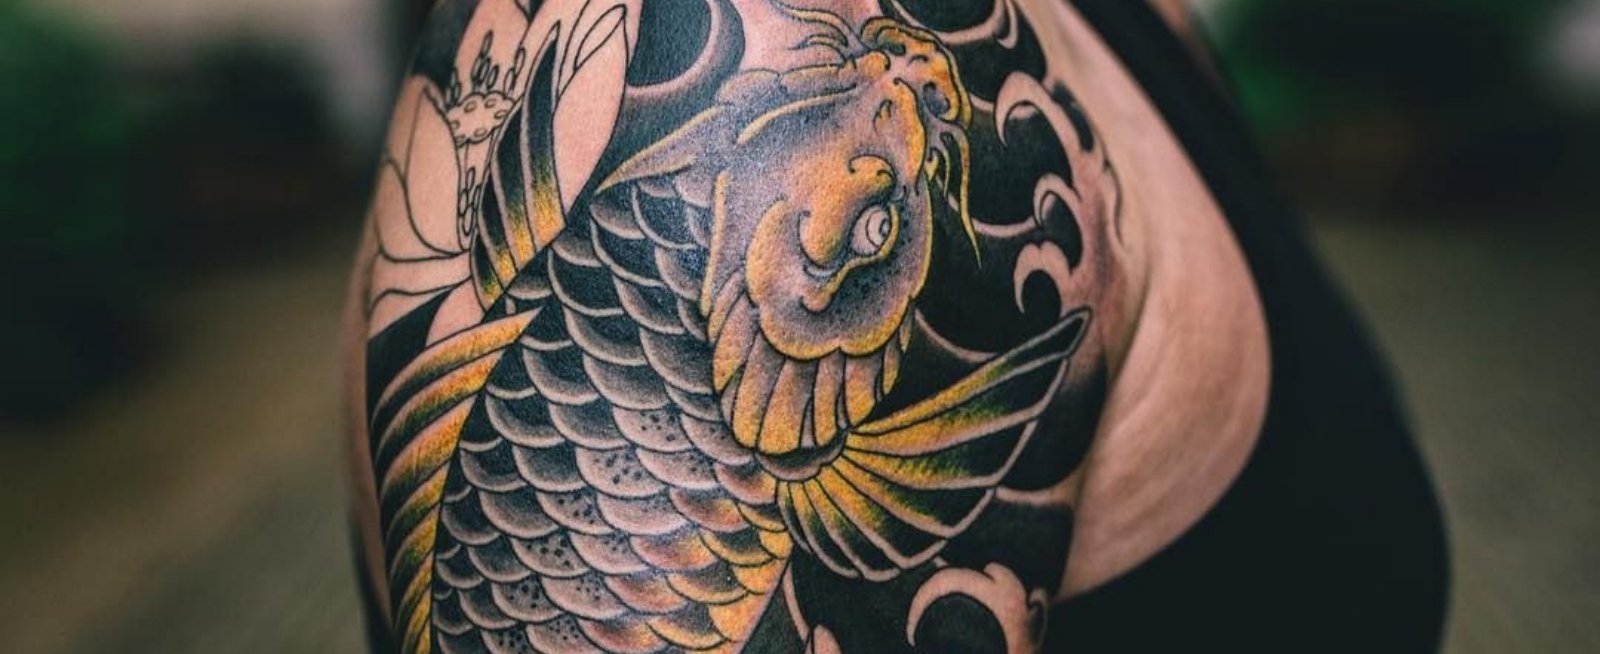 50 Tattoo Designs To Find Your Strength And Courage This Year